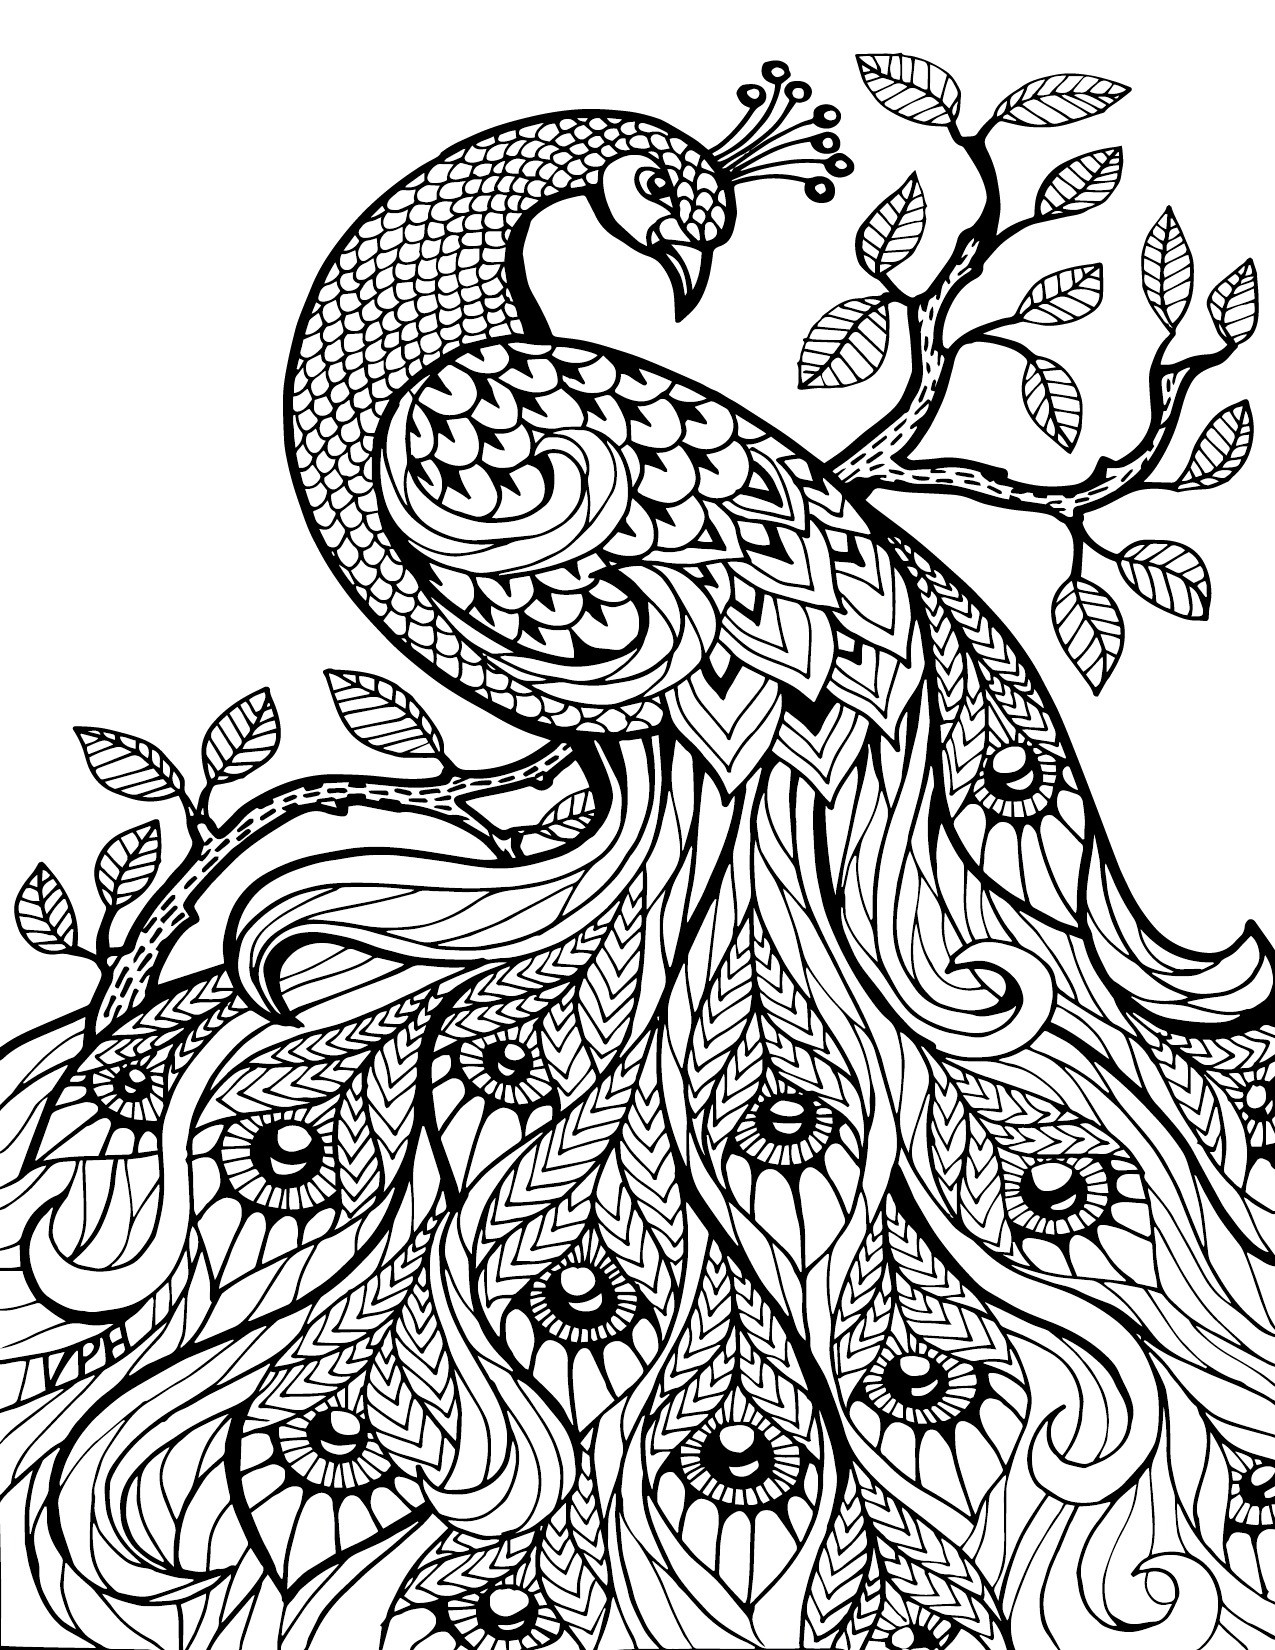 Coloring Pages Patterns Animals